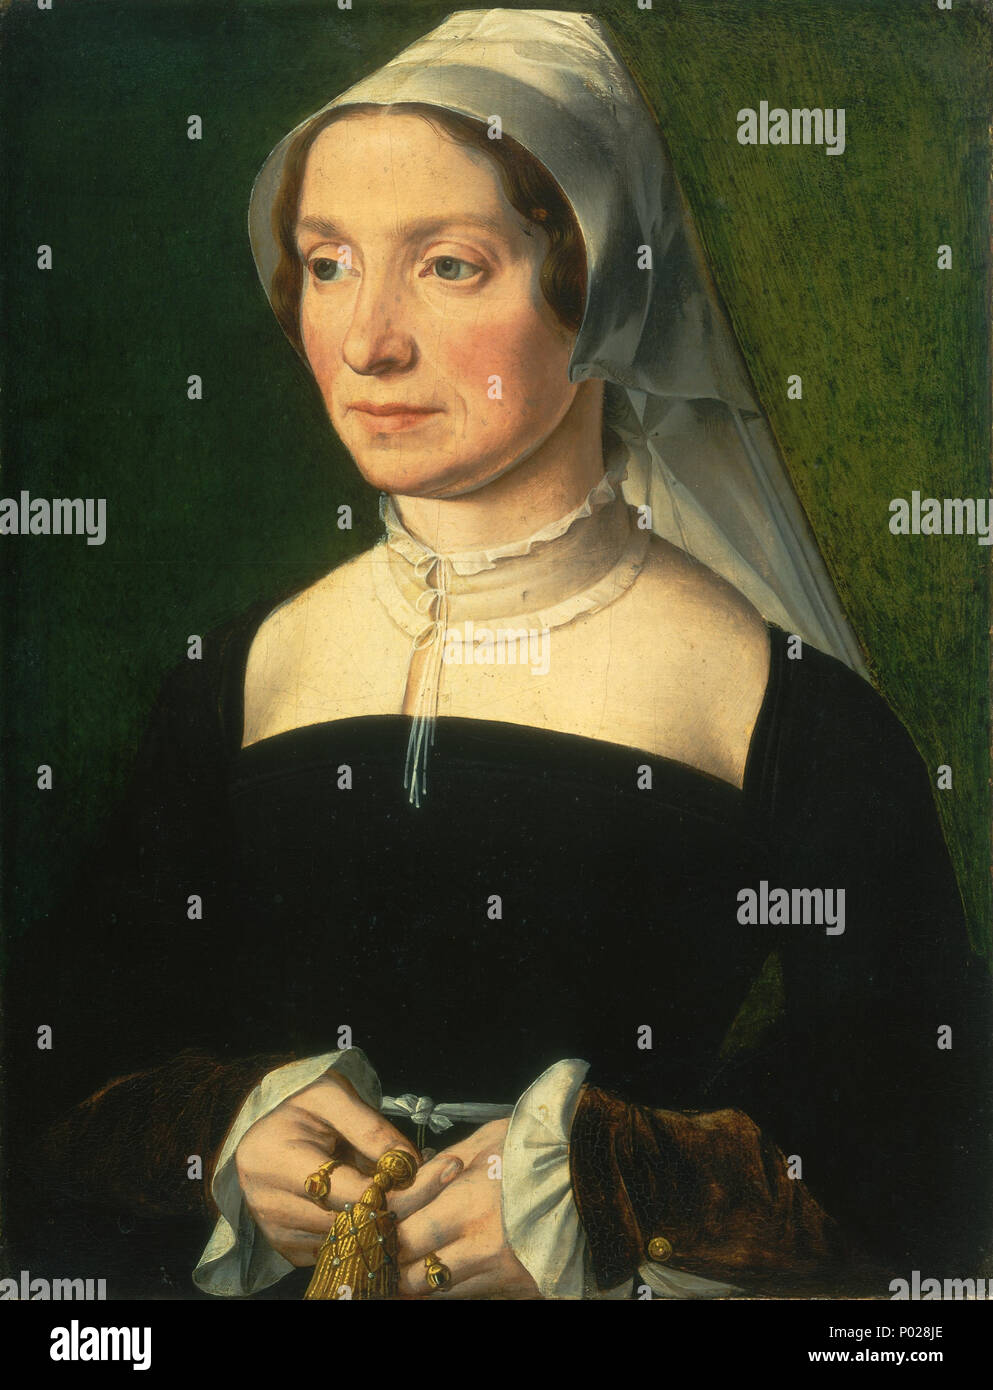 Painting; oil on panel; painted surface: 24.5 x 18.8 cm (9 5/8 x 7 3/8 in.) overall (panel): 26 x 20.1 cm (10 1/4 x 7 15/16 in.); 25 Wife of a Member of the de Hondecoeter Family SC-000768 Stock Photo